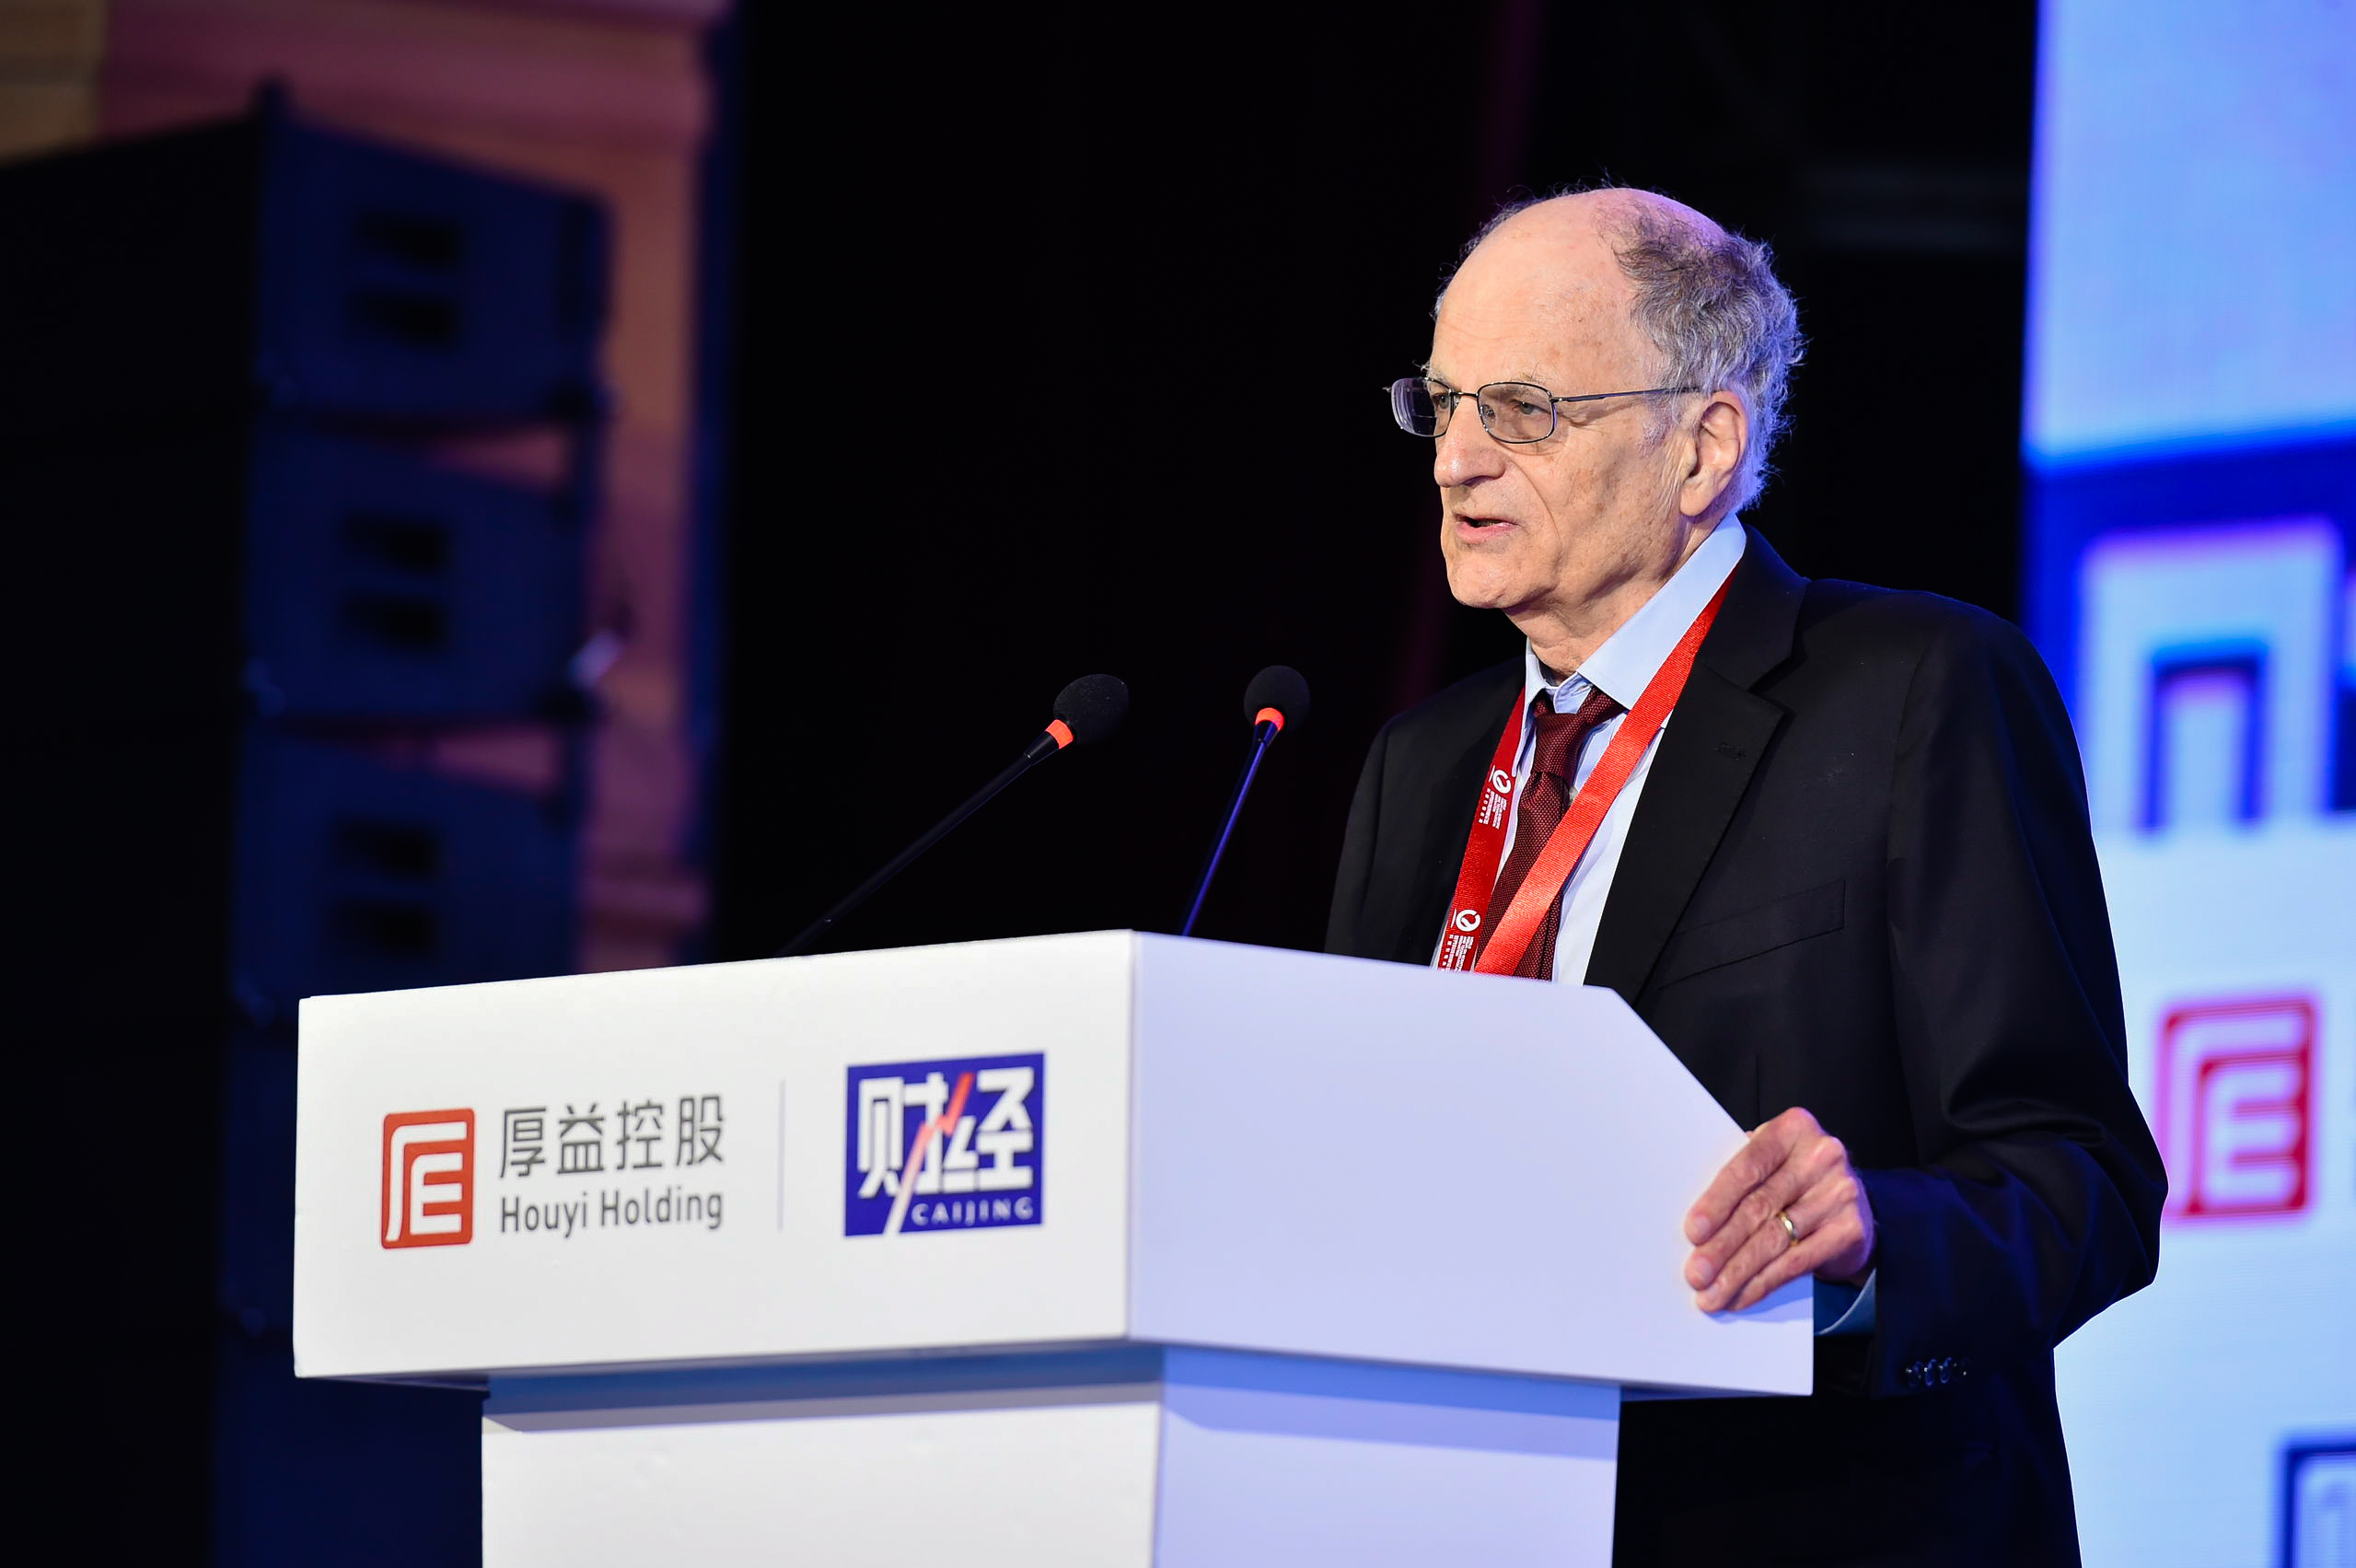 Thomas J. Sargent, winner of the 2011 Nobel Prize in Economics, speaks at the 2018 World Forum on Scientific and Technological Innovation in Beijing, Aug. 11, 2018. [Photo courtesy of the 2018 World Forum on Scientific and Technological Innovation]